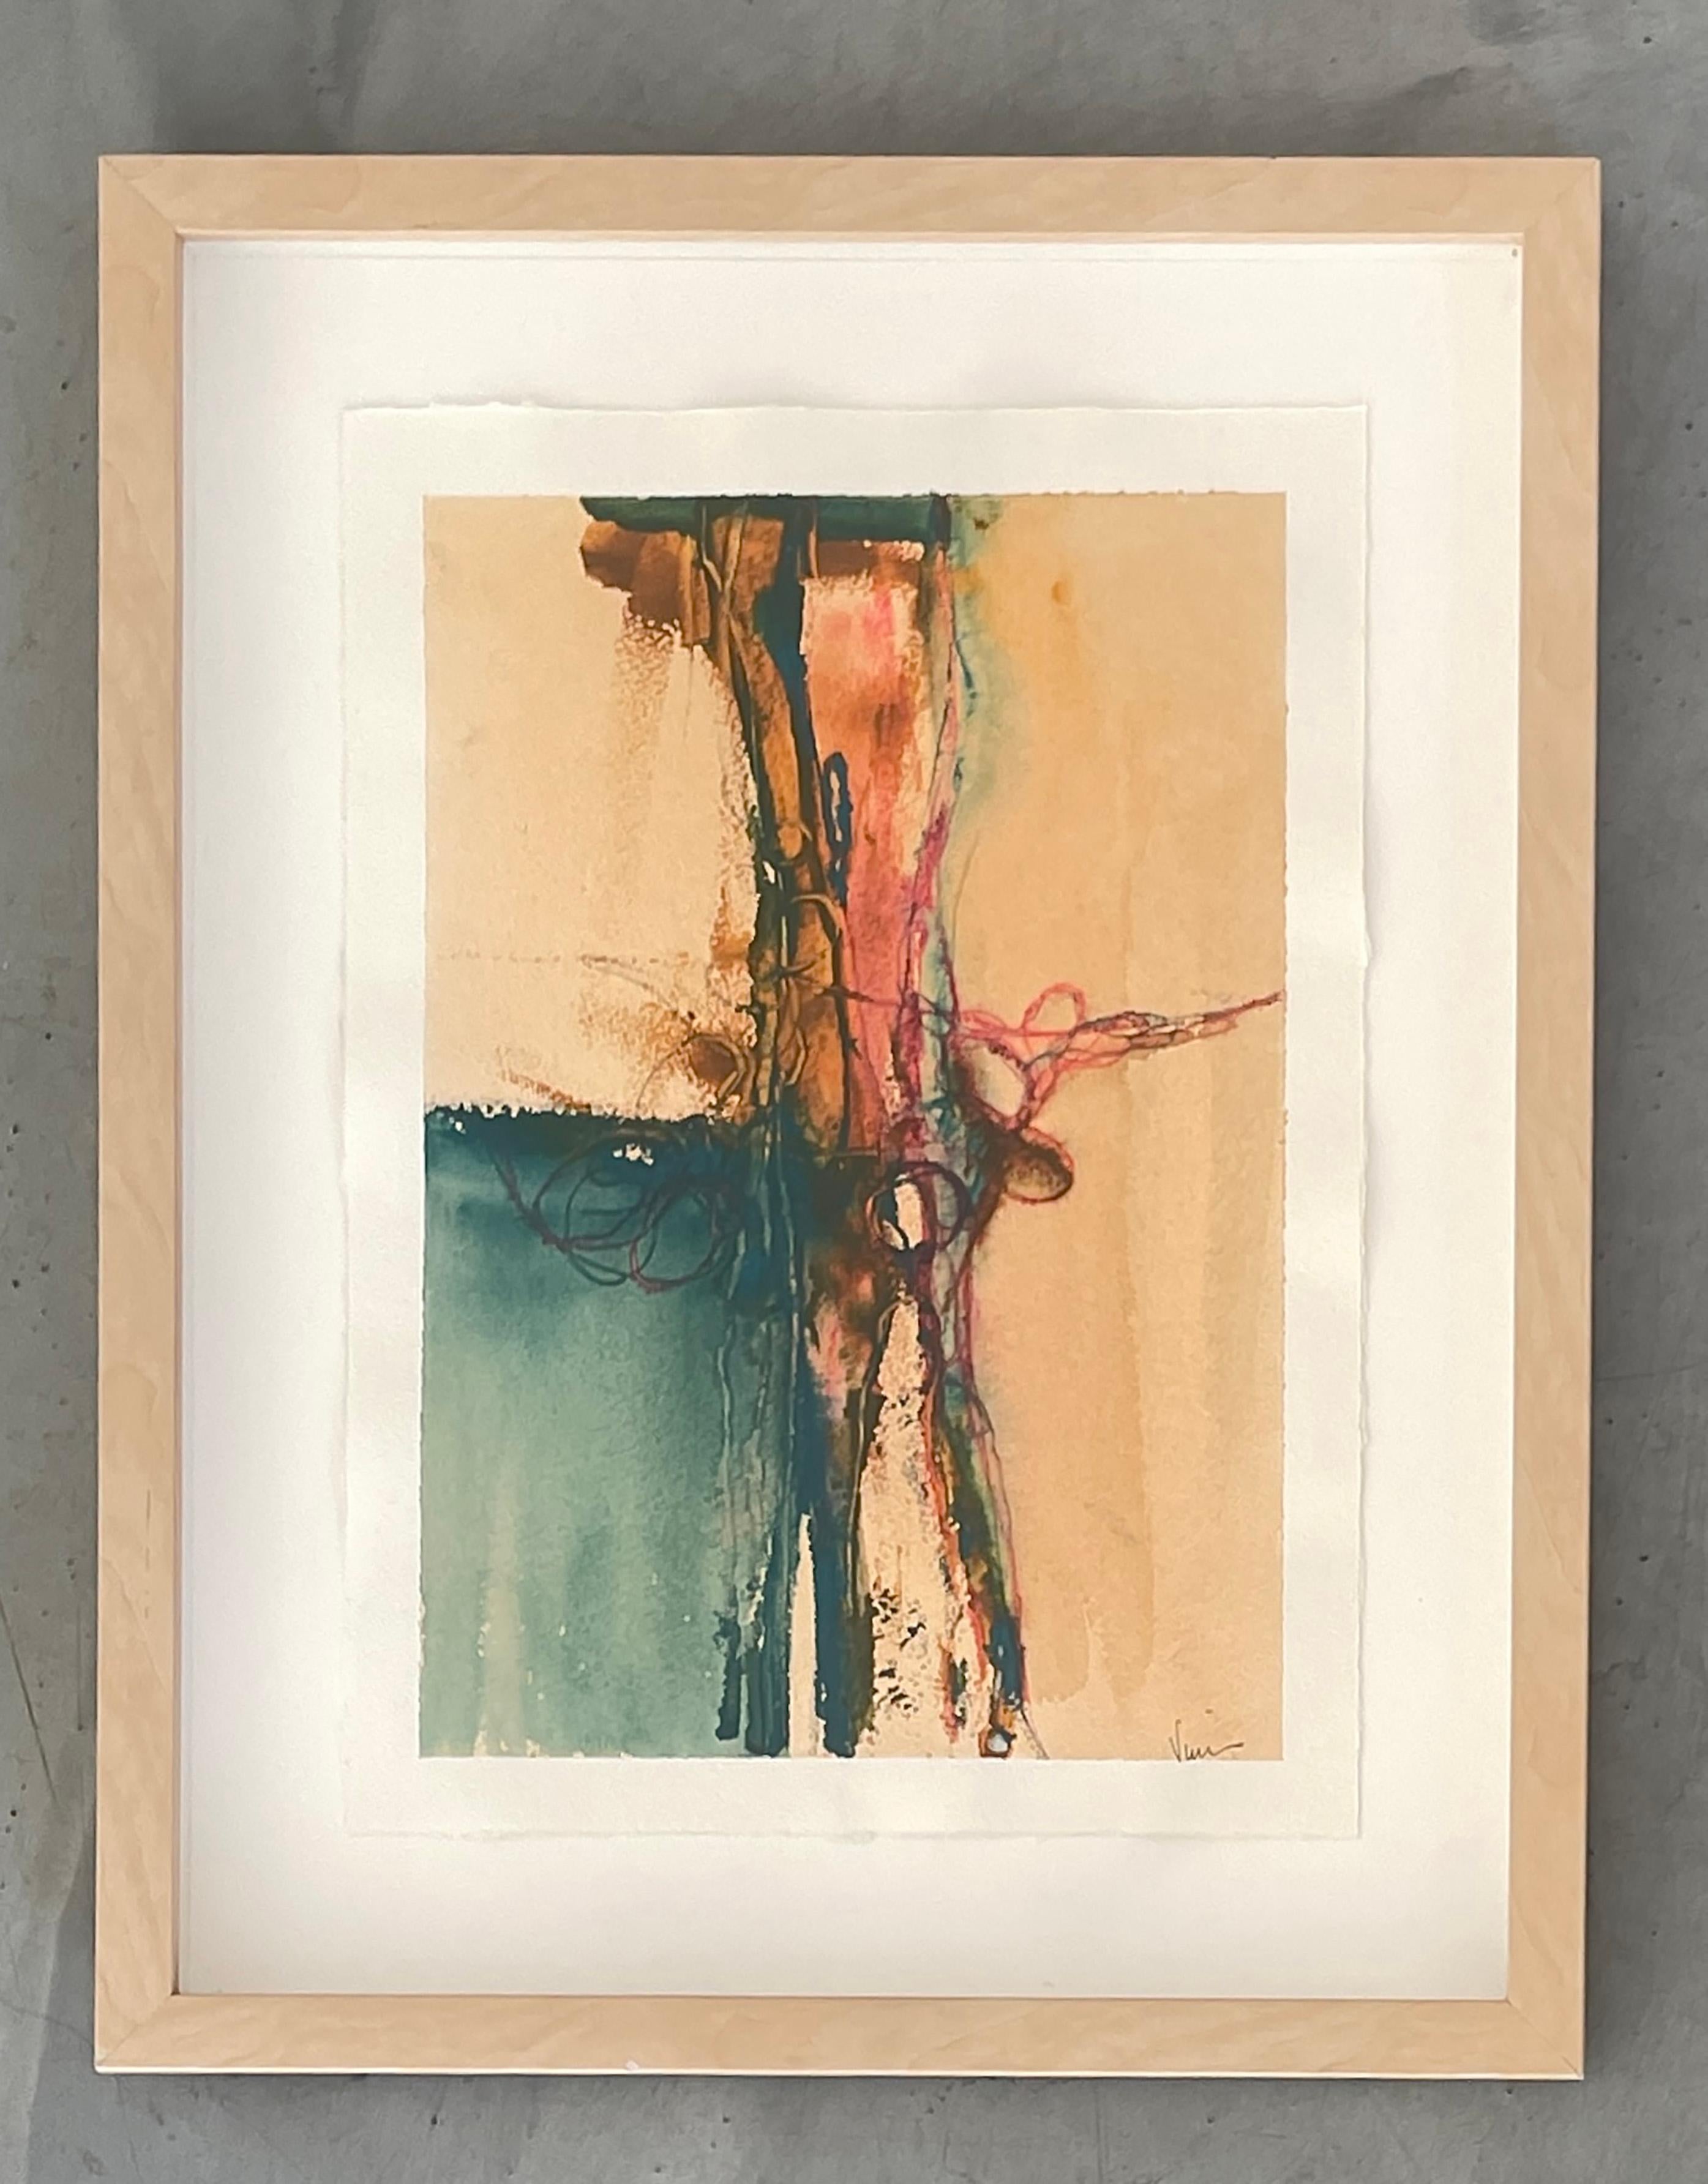 Water and Light, Untitled #7 - water color on paper - Abstract Painting by Stephanie Visser 